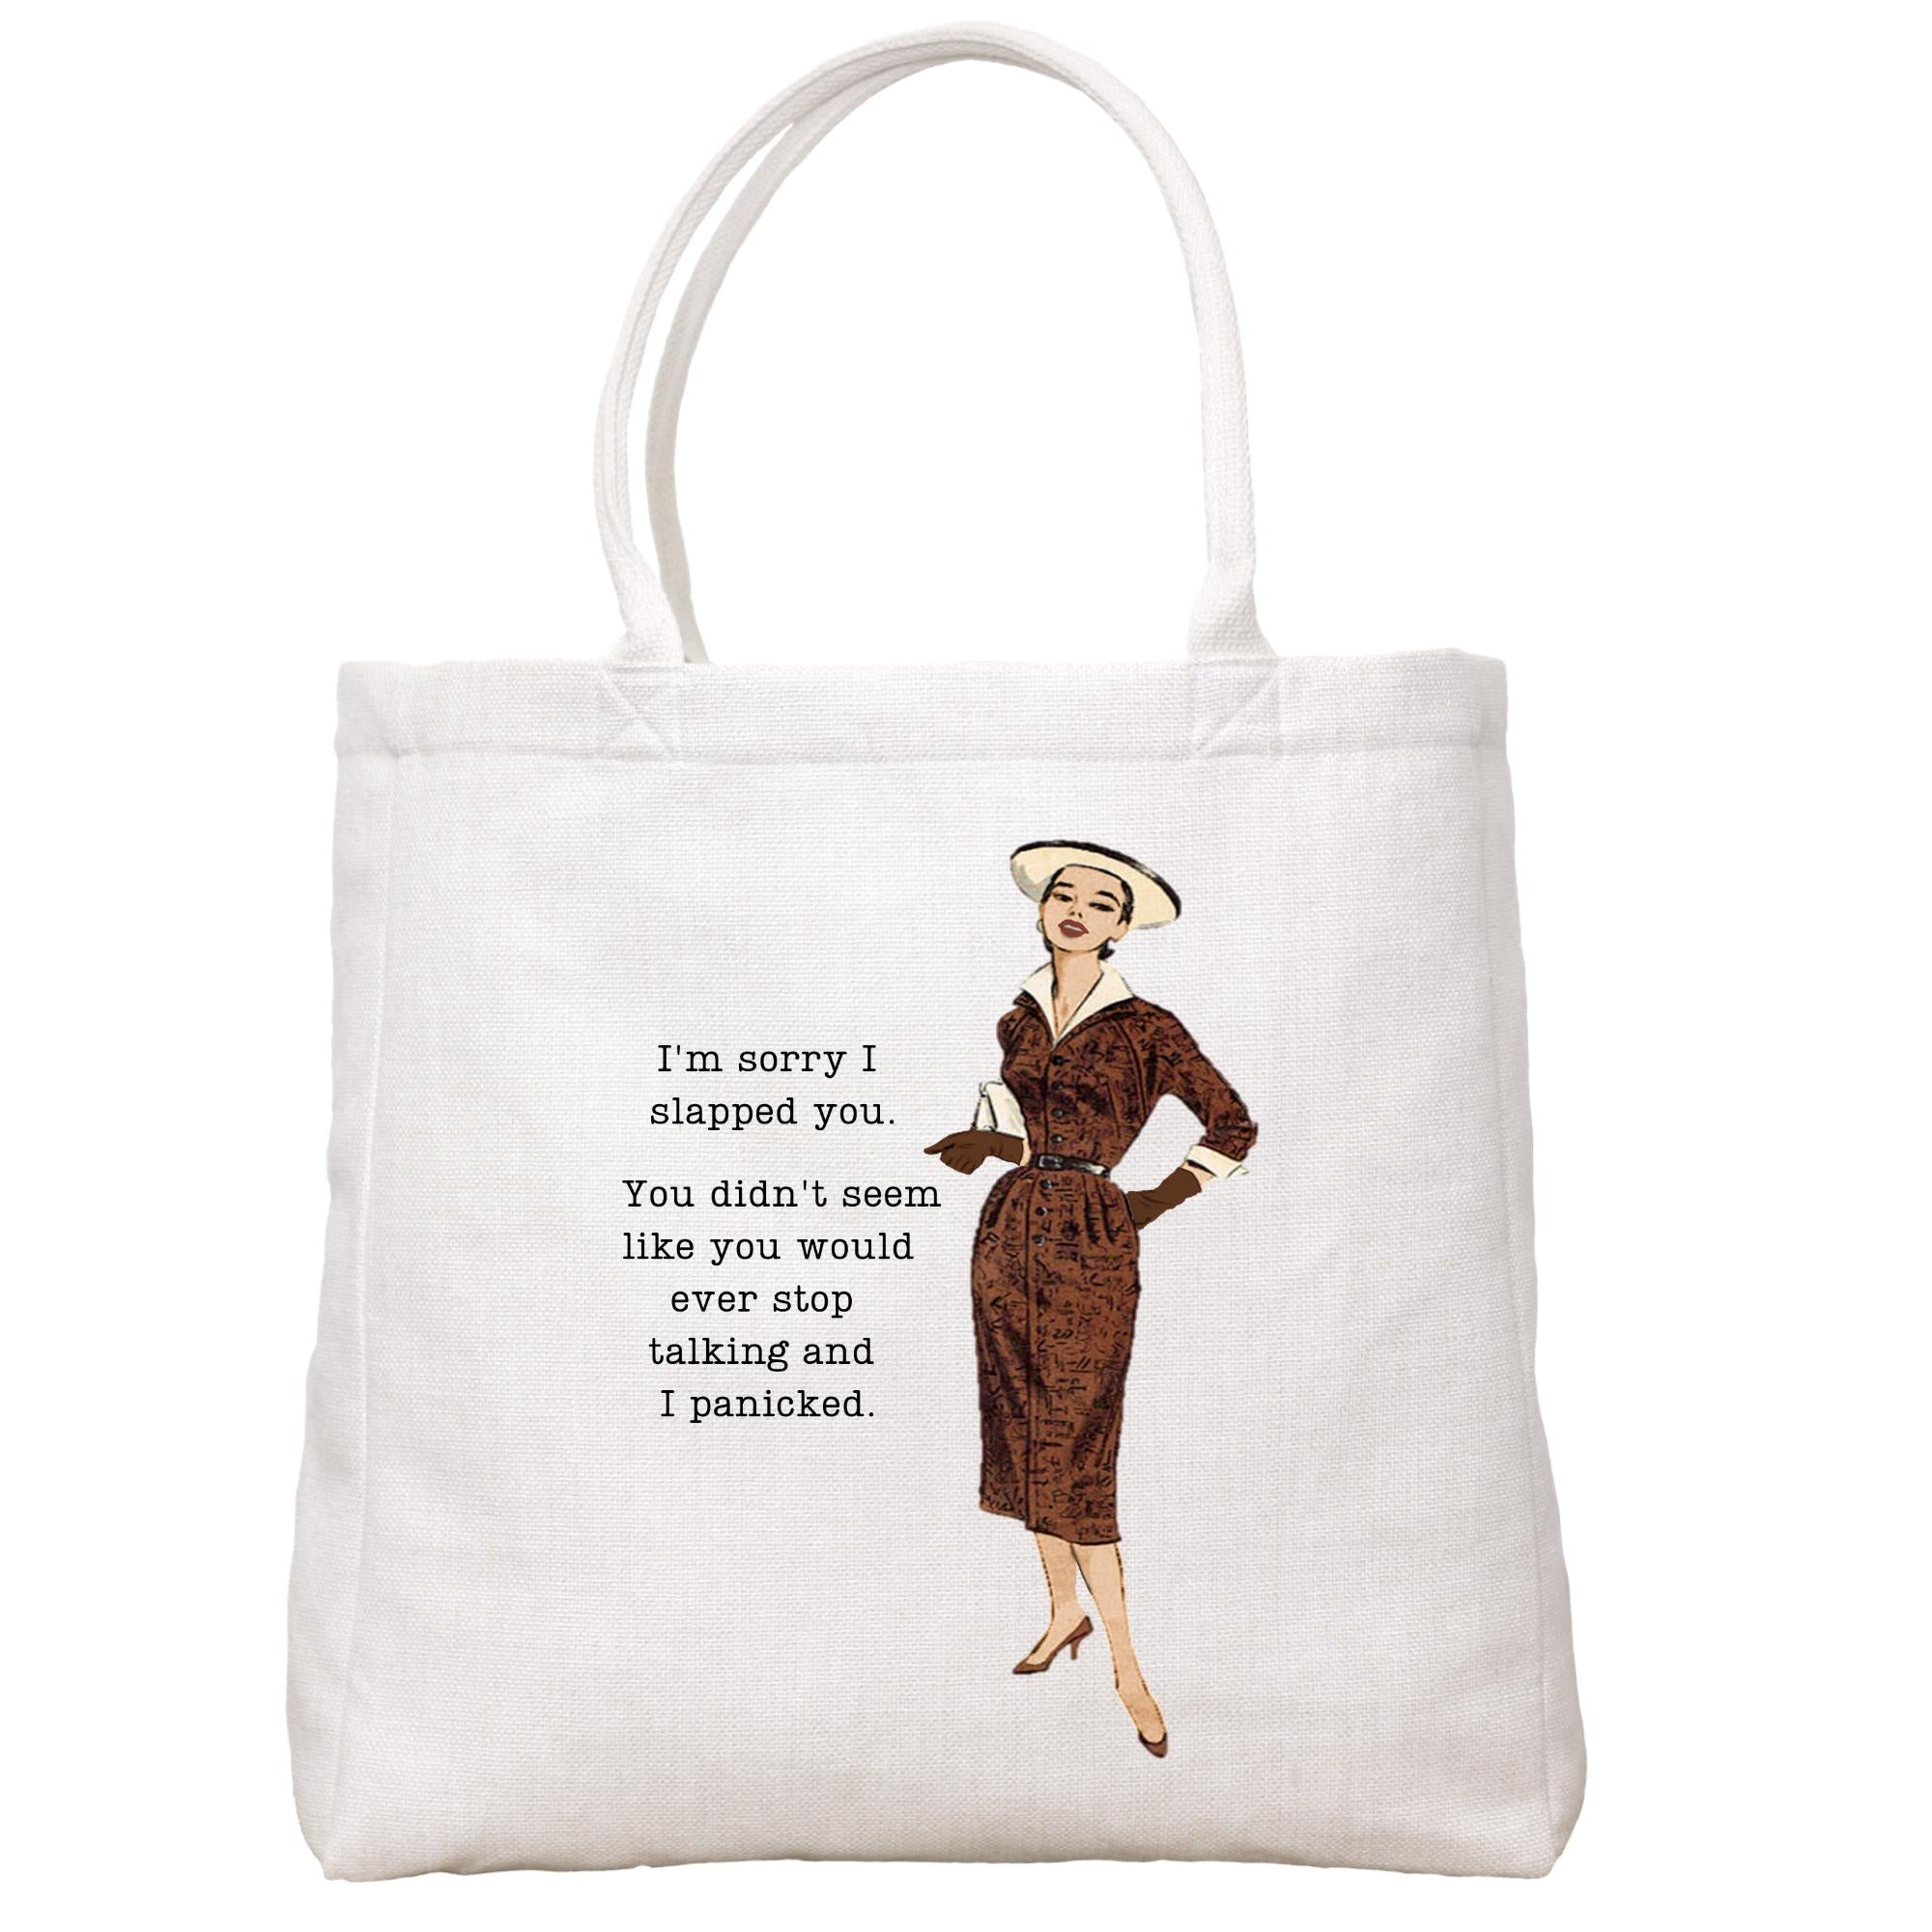 Are You a Slogan Bag or an 'It Bag' Kind of Girl?